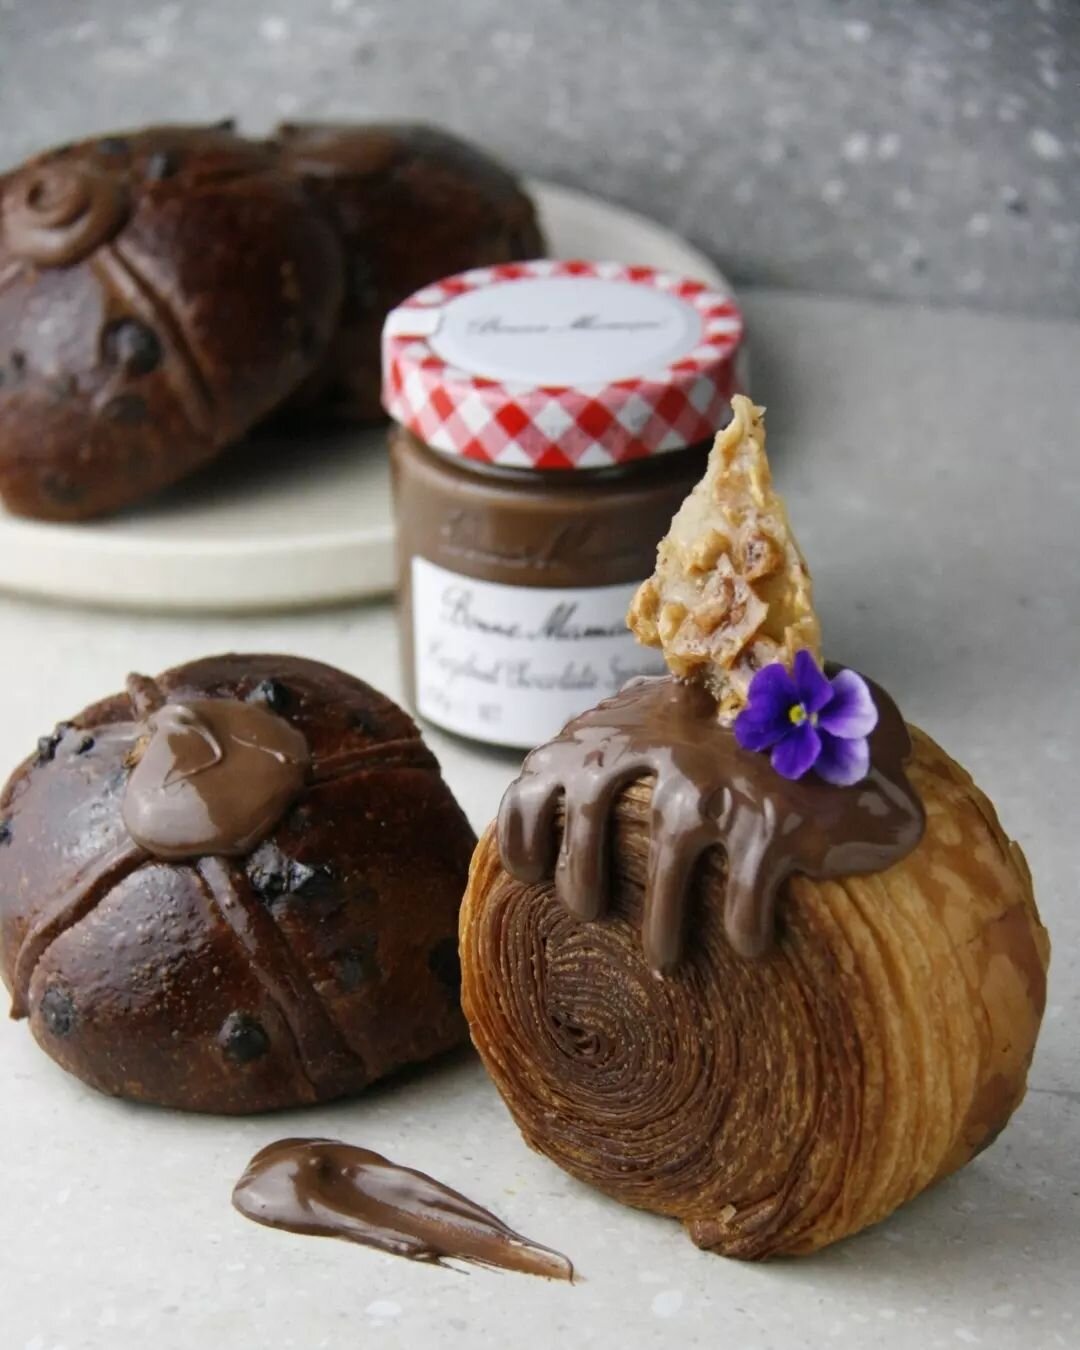 Excited to share a delicious new collaboration with&nbsp;@bonnemaman_au and&nbsp;@callebakery!&nbsp;

Just in time for Easter, Call&eacute; Bakery has created two irresistible pastries using the newly released Hazelnut Chocolate Spread.&nbsp;Availabl